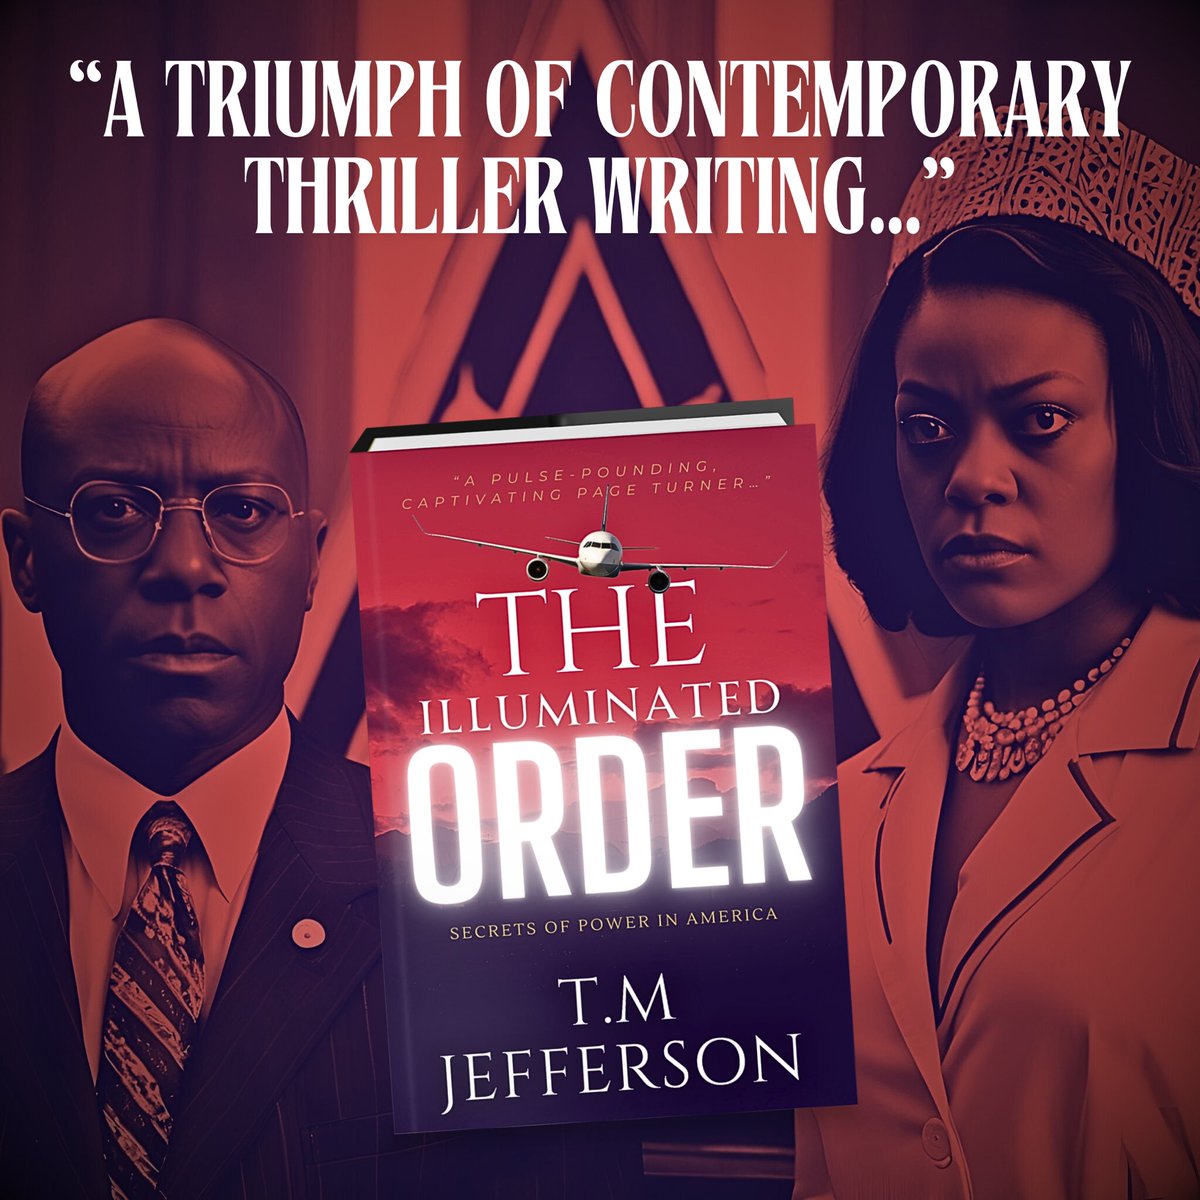 “A triumph of contemporary thriller writing…” #theilluminatedorder #conspiracy #thriller #blackauthors #books #reading #selfpublishing